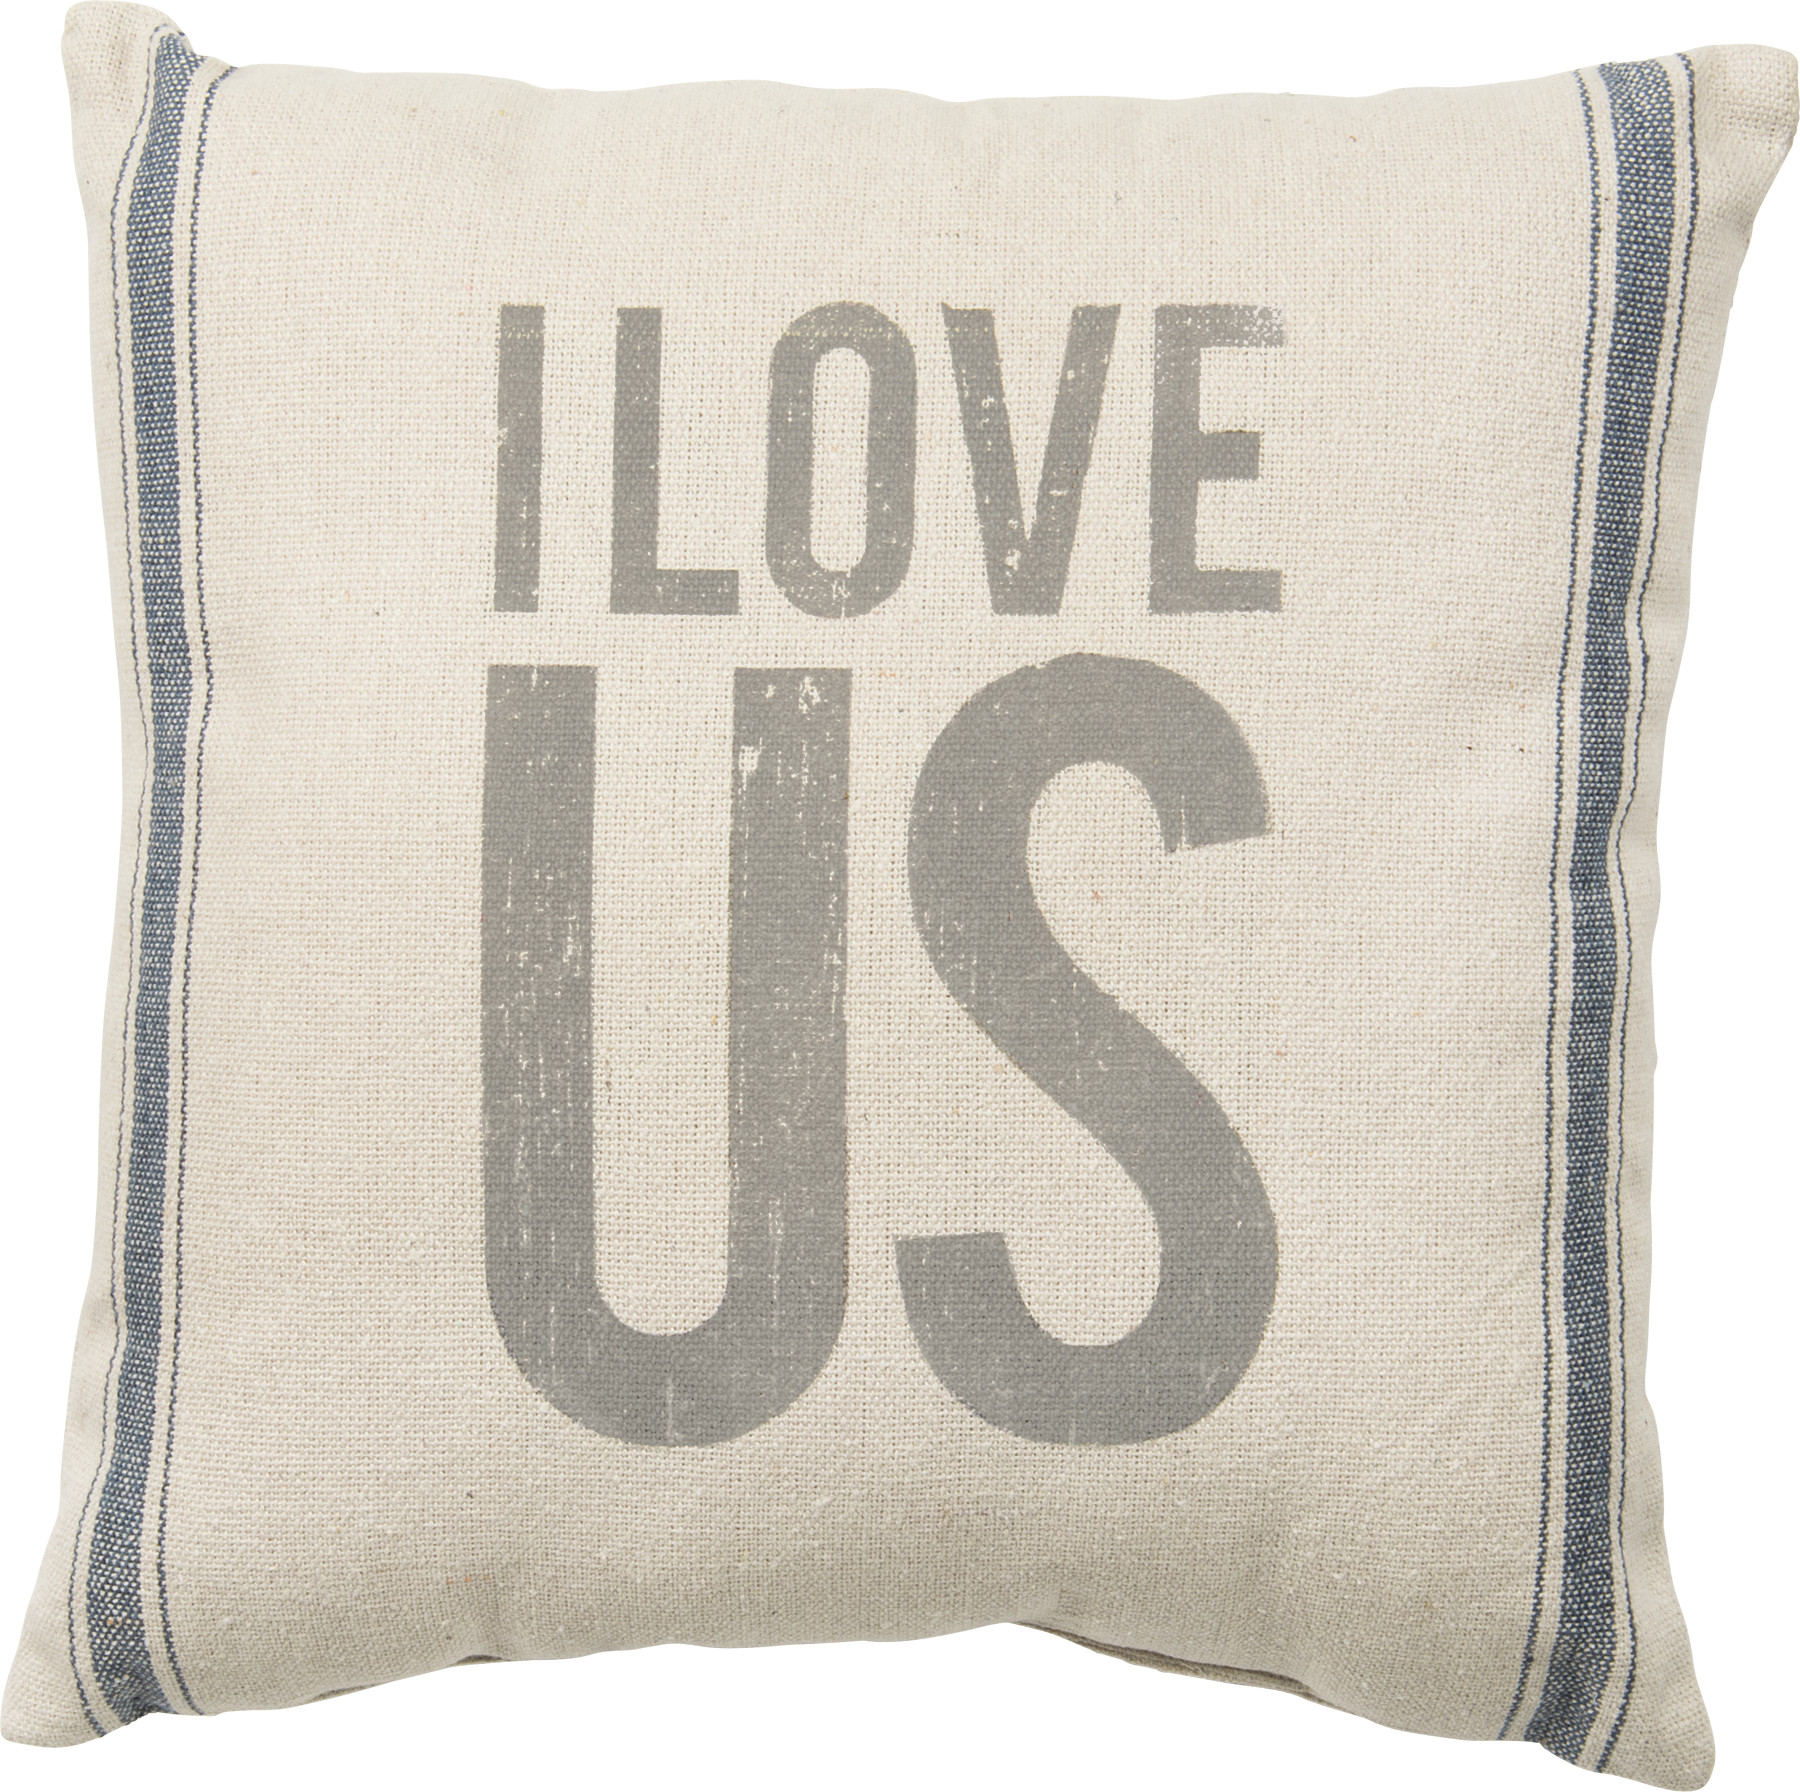 I Love Us Pillow  Primitives By Kathy